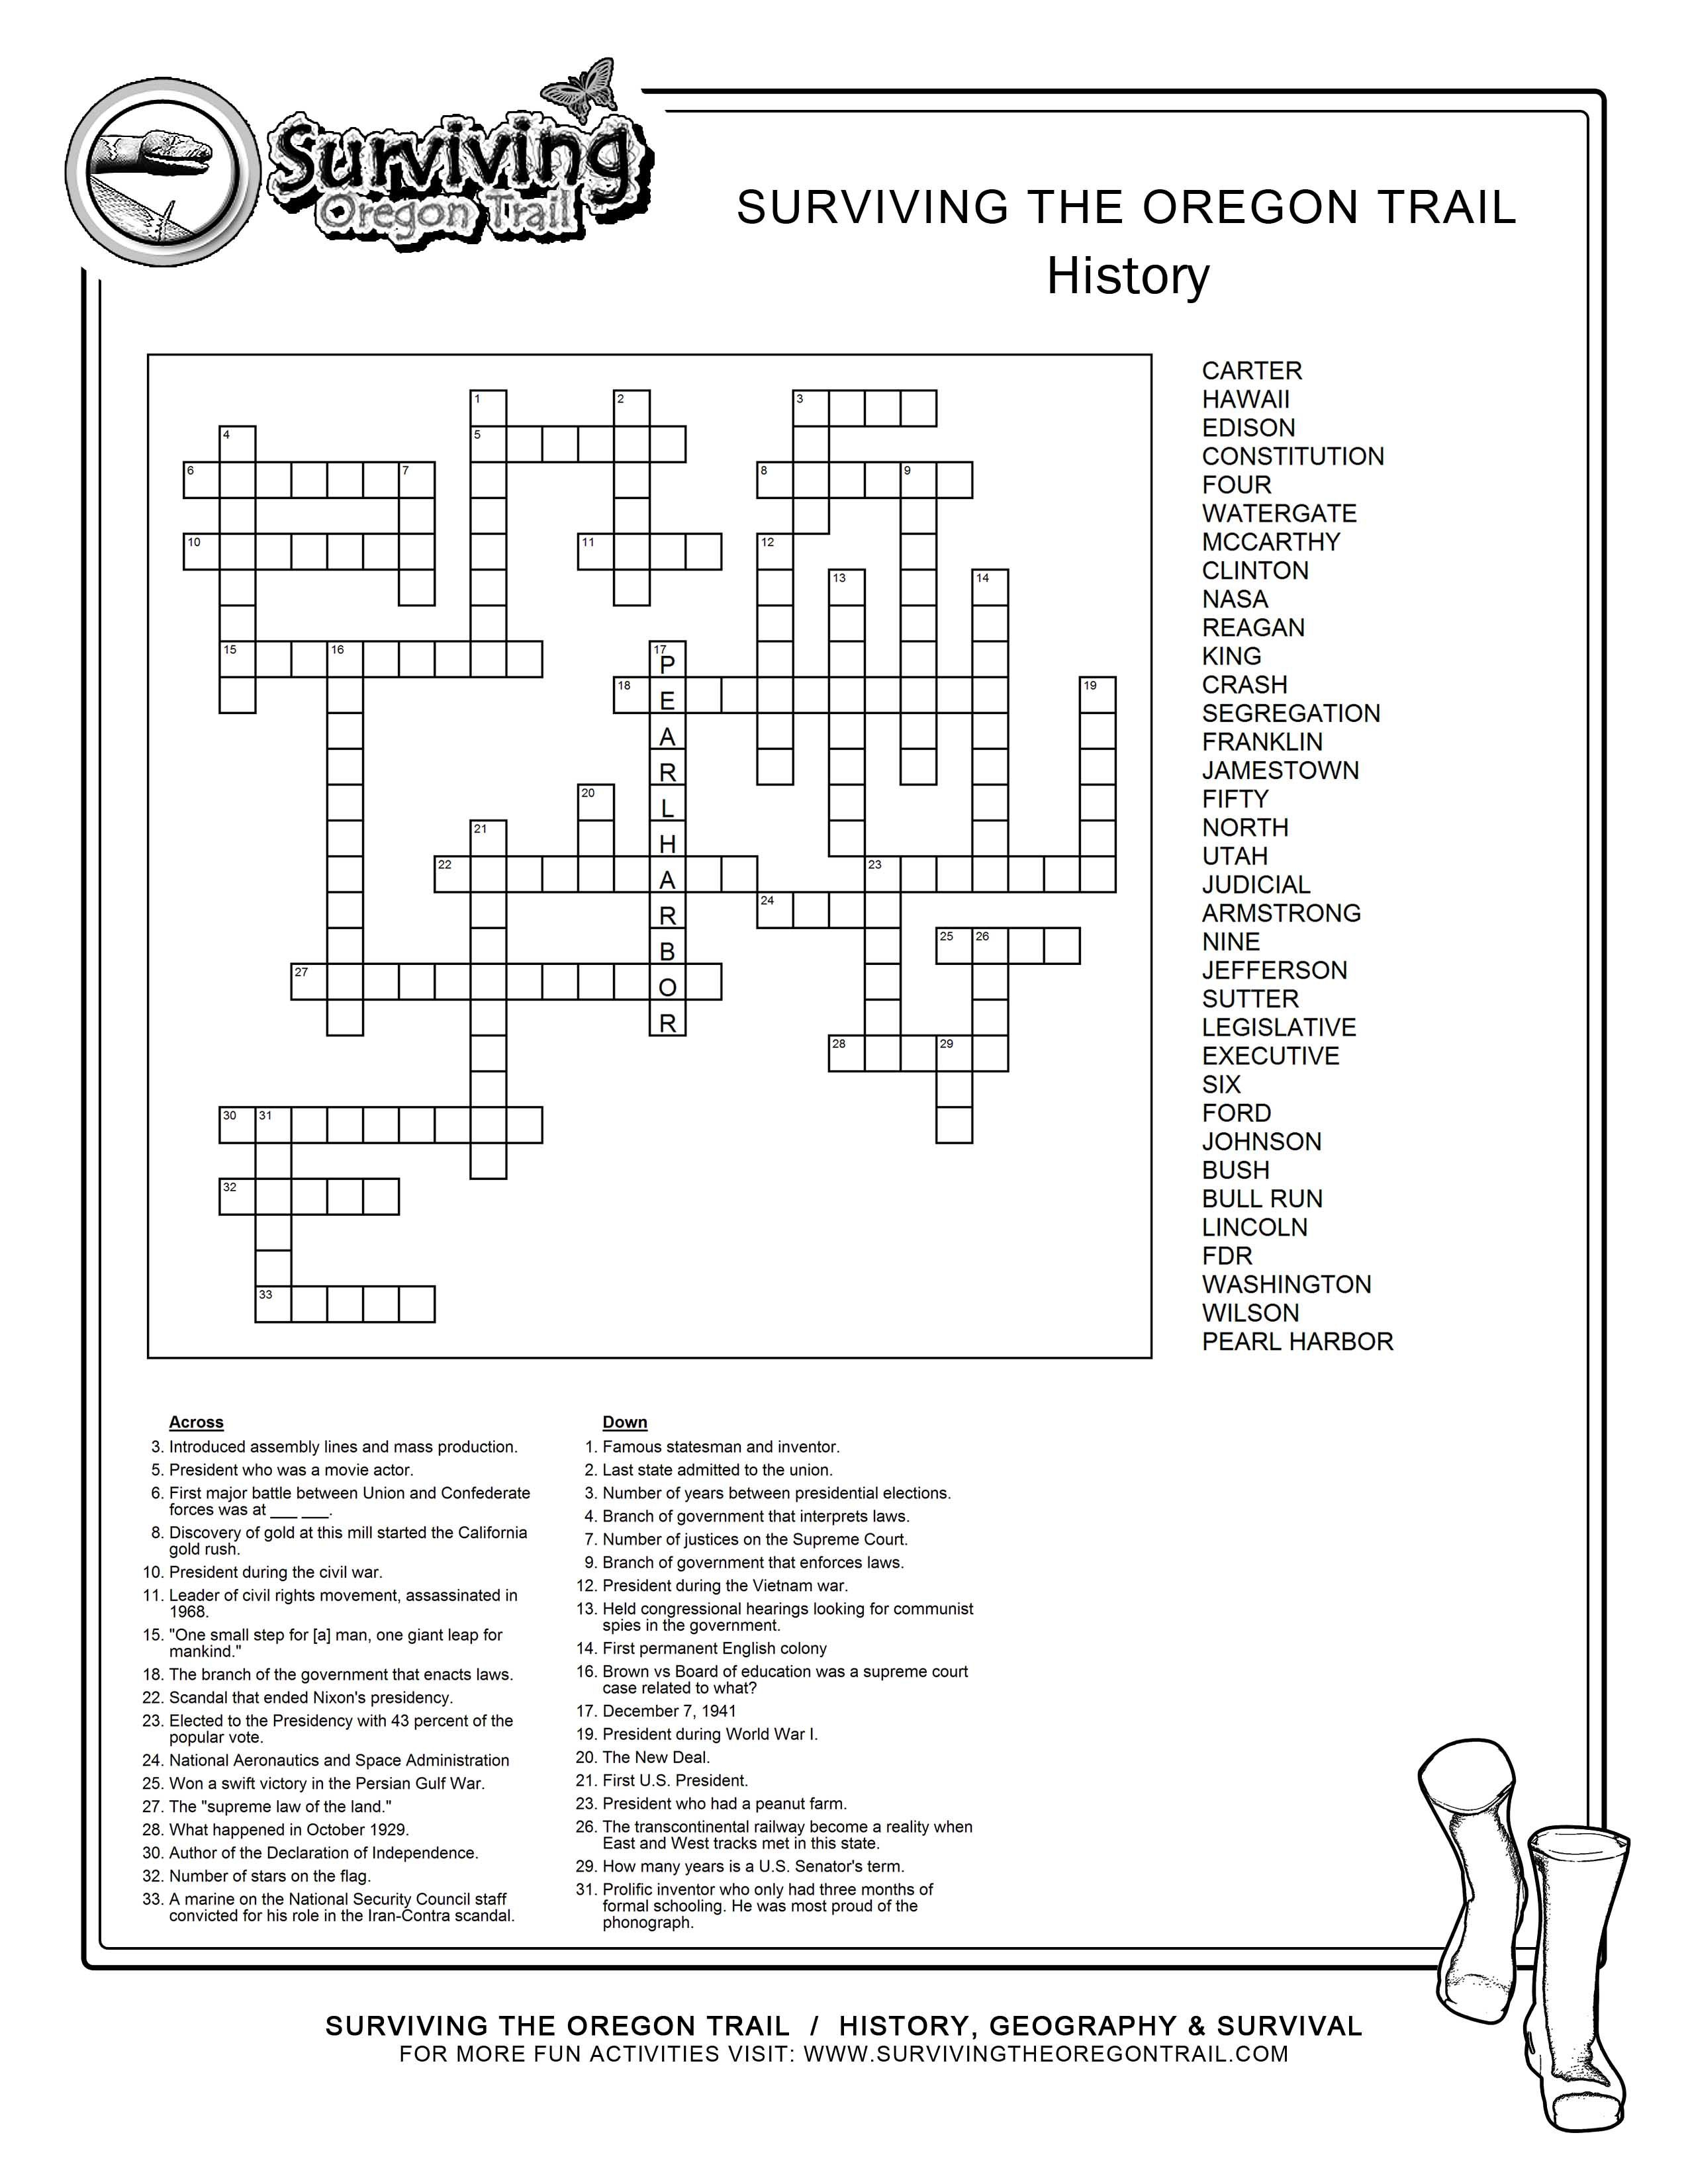 Fill Free To Save This Historical Crossword Puzzle To Your Computer - Printable Russian Crosswords